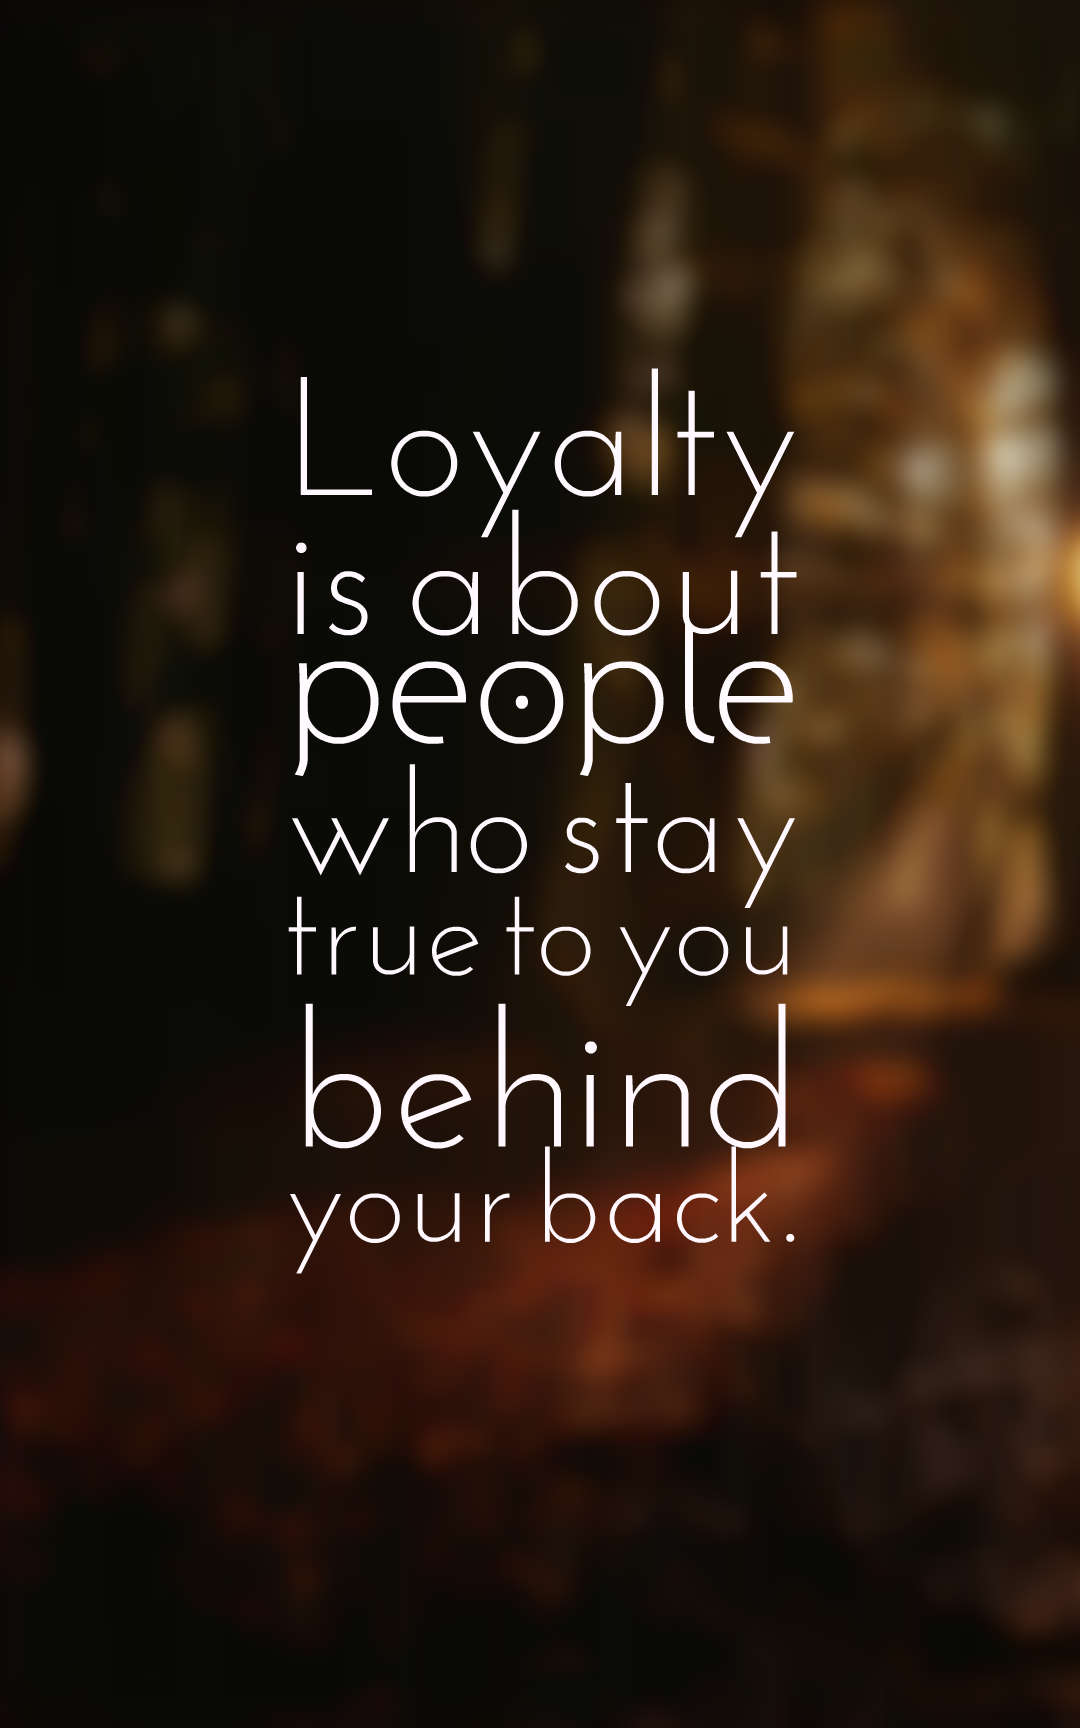 55 Inspiring Loyalty Quotes and Sayings